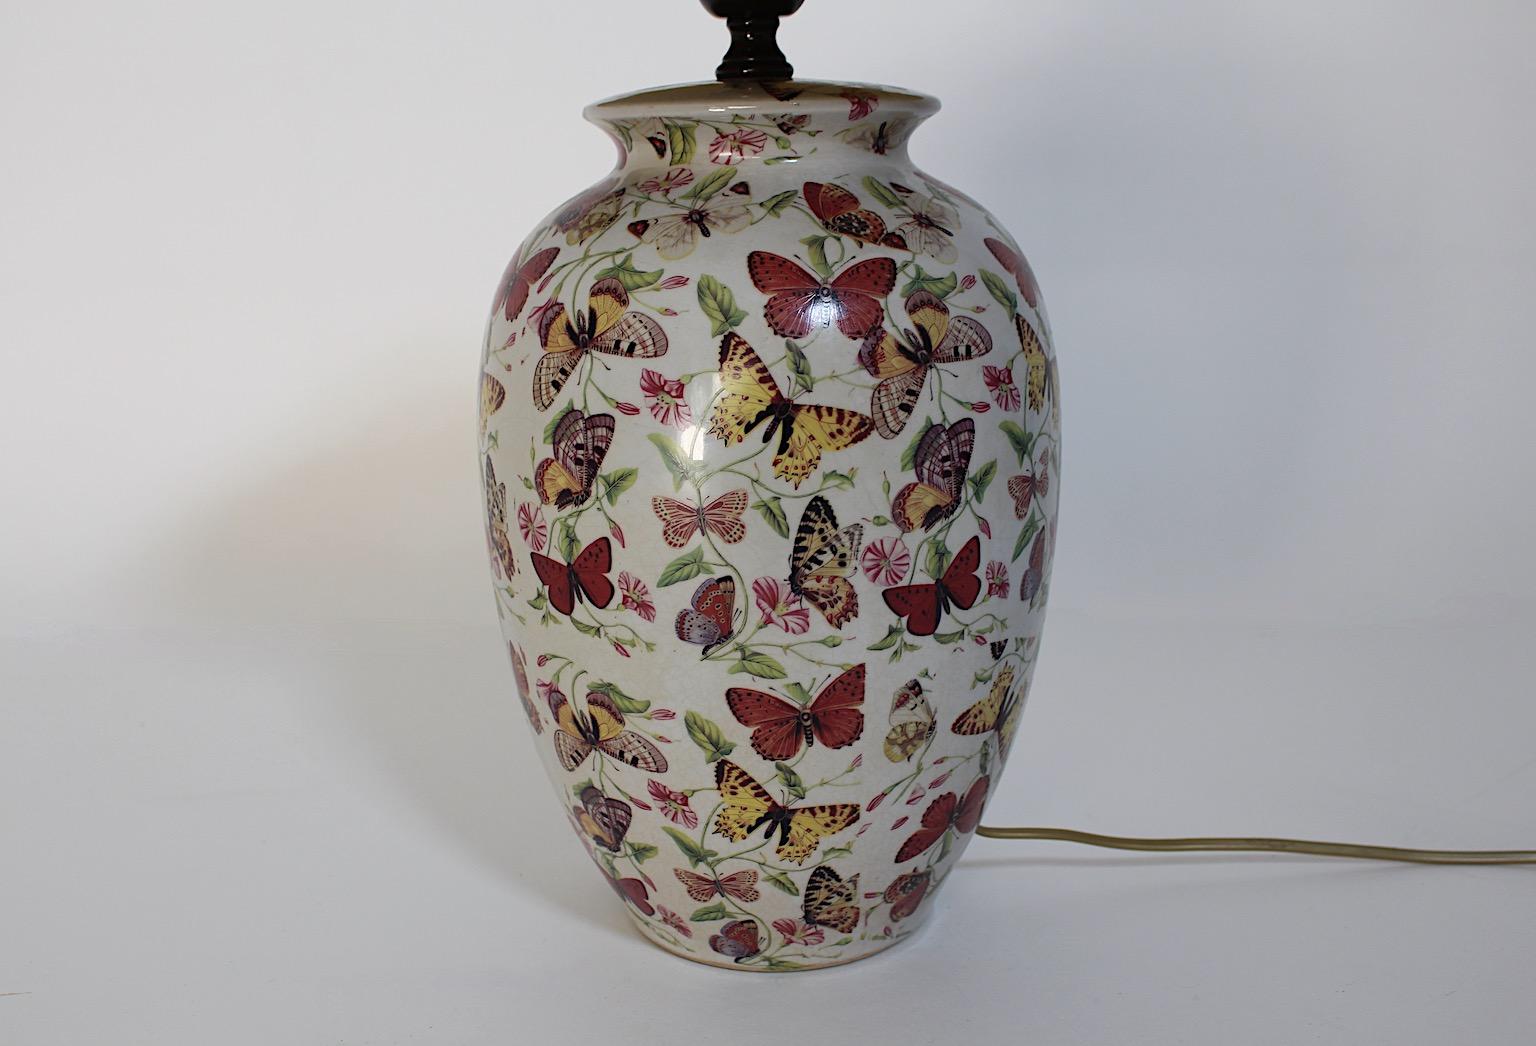 Modern Vintage Table Lamp Ceramic Brass Floral Fauna Butterfly Flowers 1980s For Sale 5